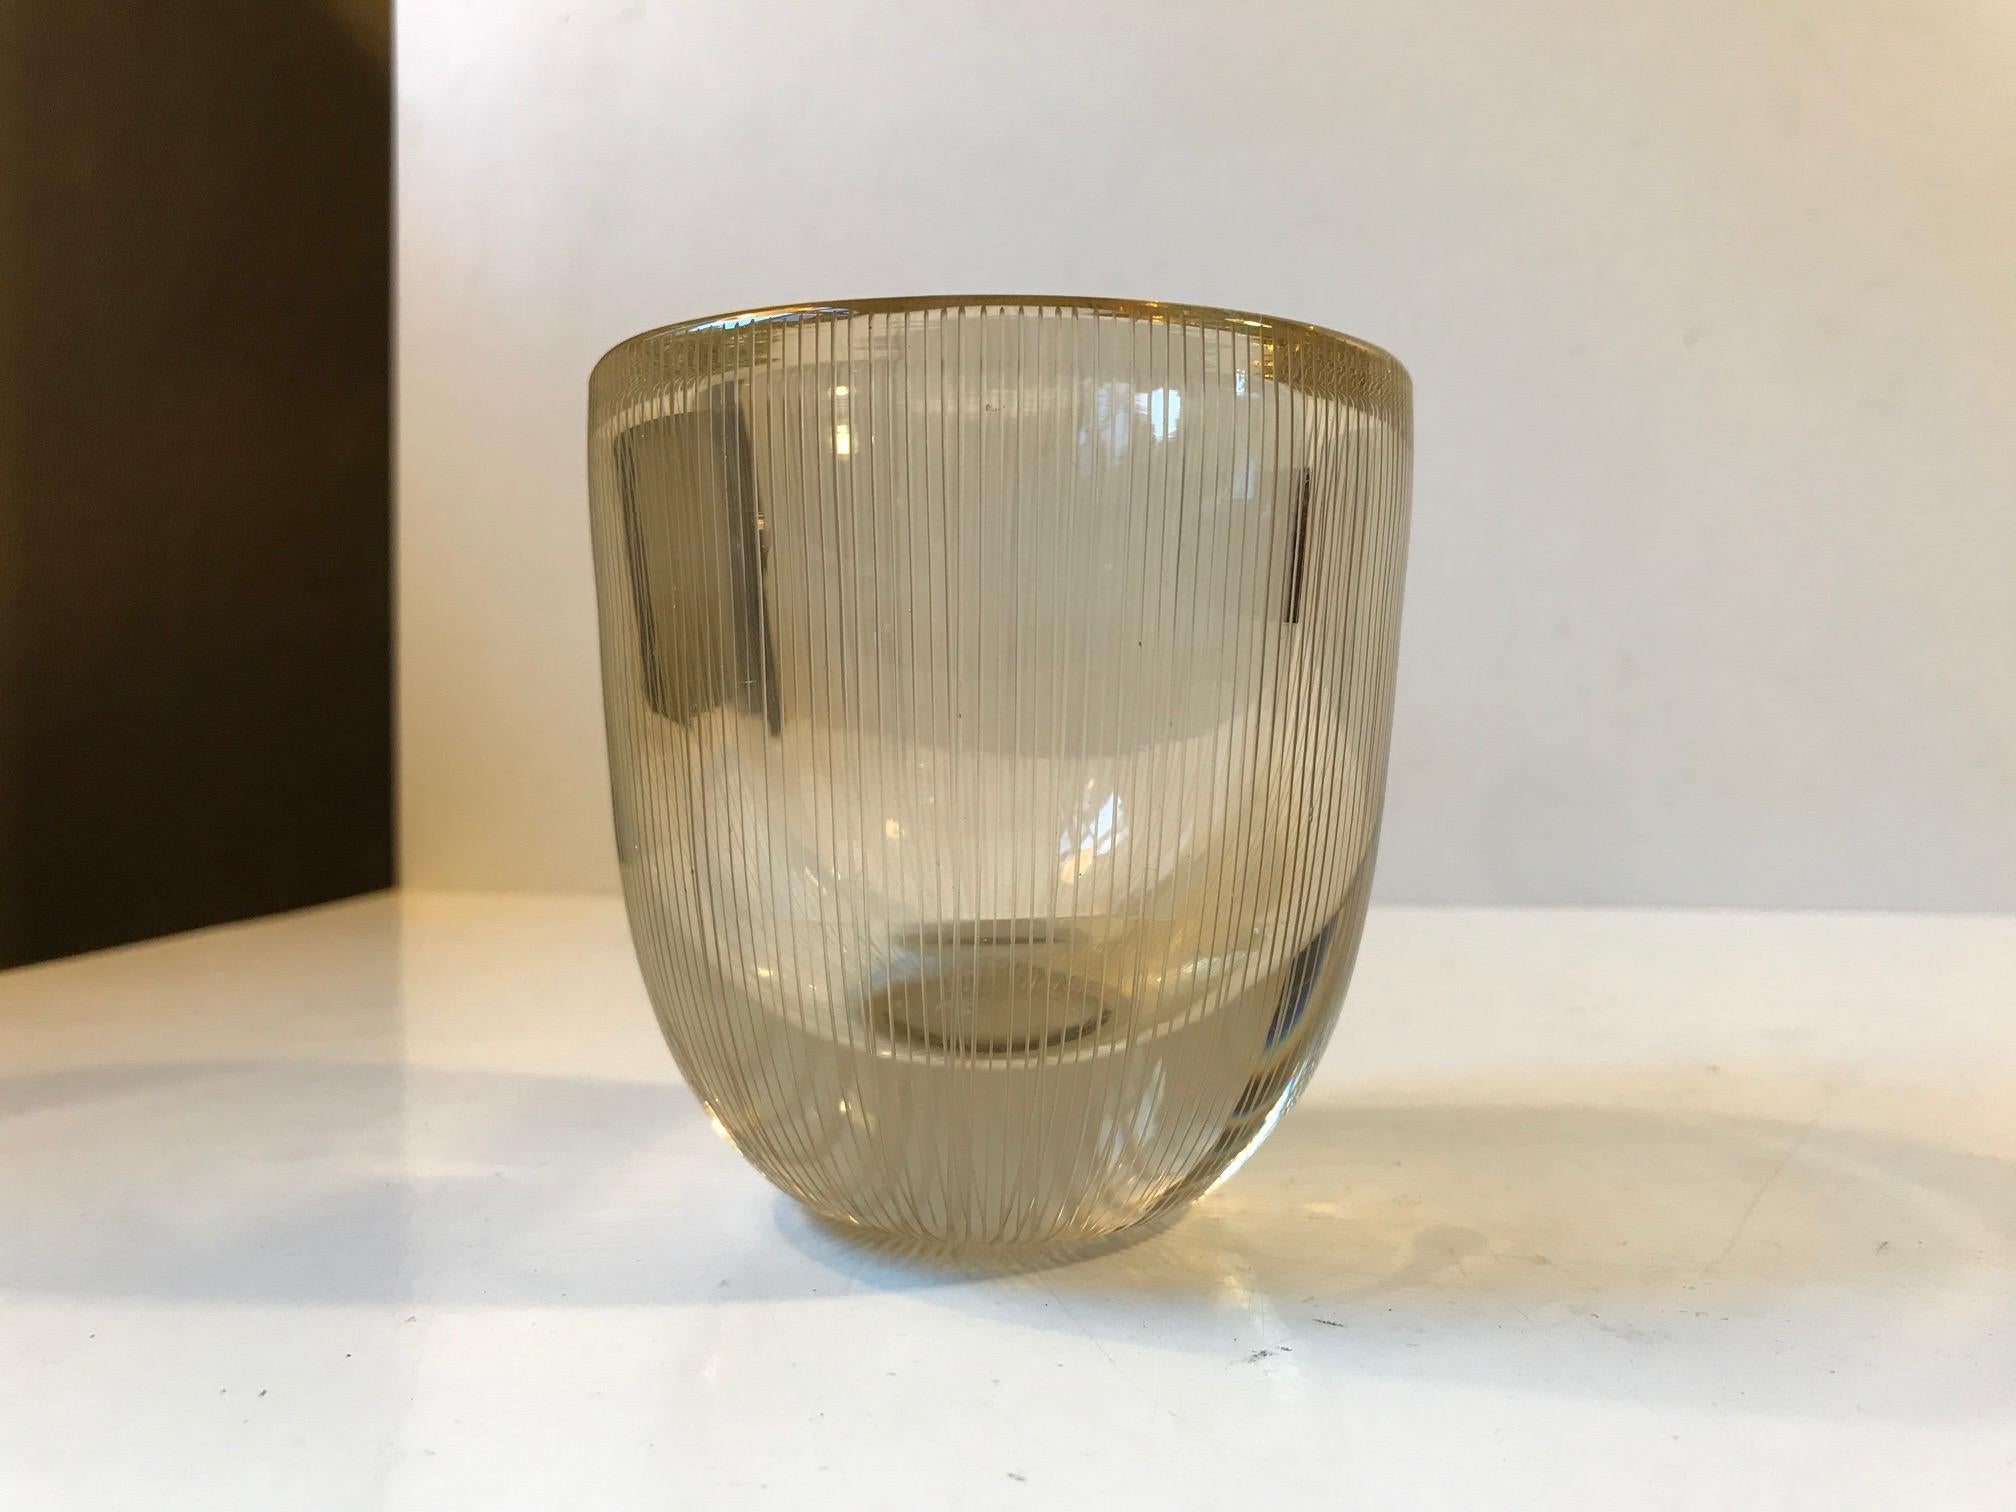 Clear slightly yellow-toned glass vase with vertical engraved lines. Designed by Tapio Wirkkala in Finland and manufactured by Littala in the early 1960s. The shape and tone of the glass is unusual. This piece is signed indistinguishable to the